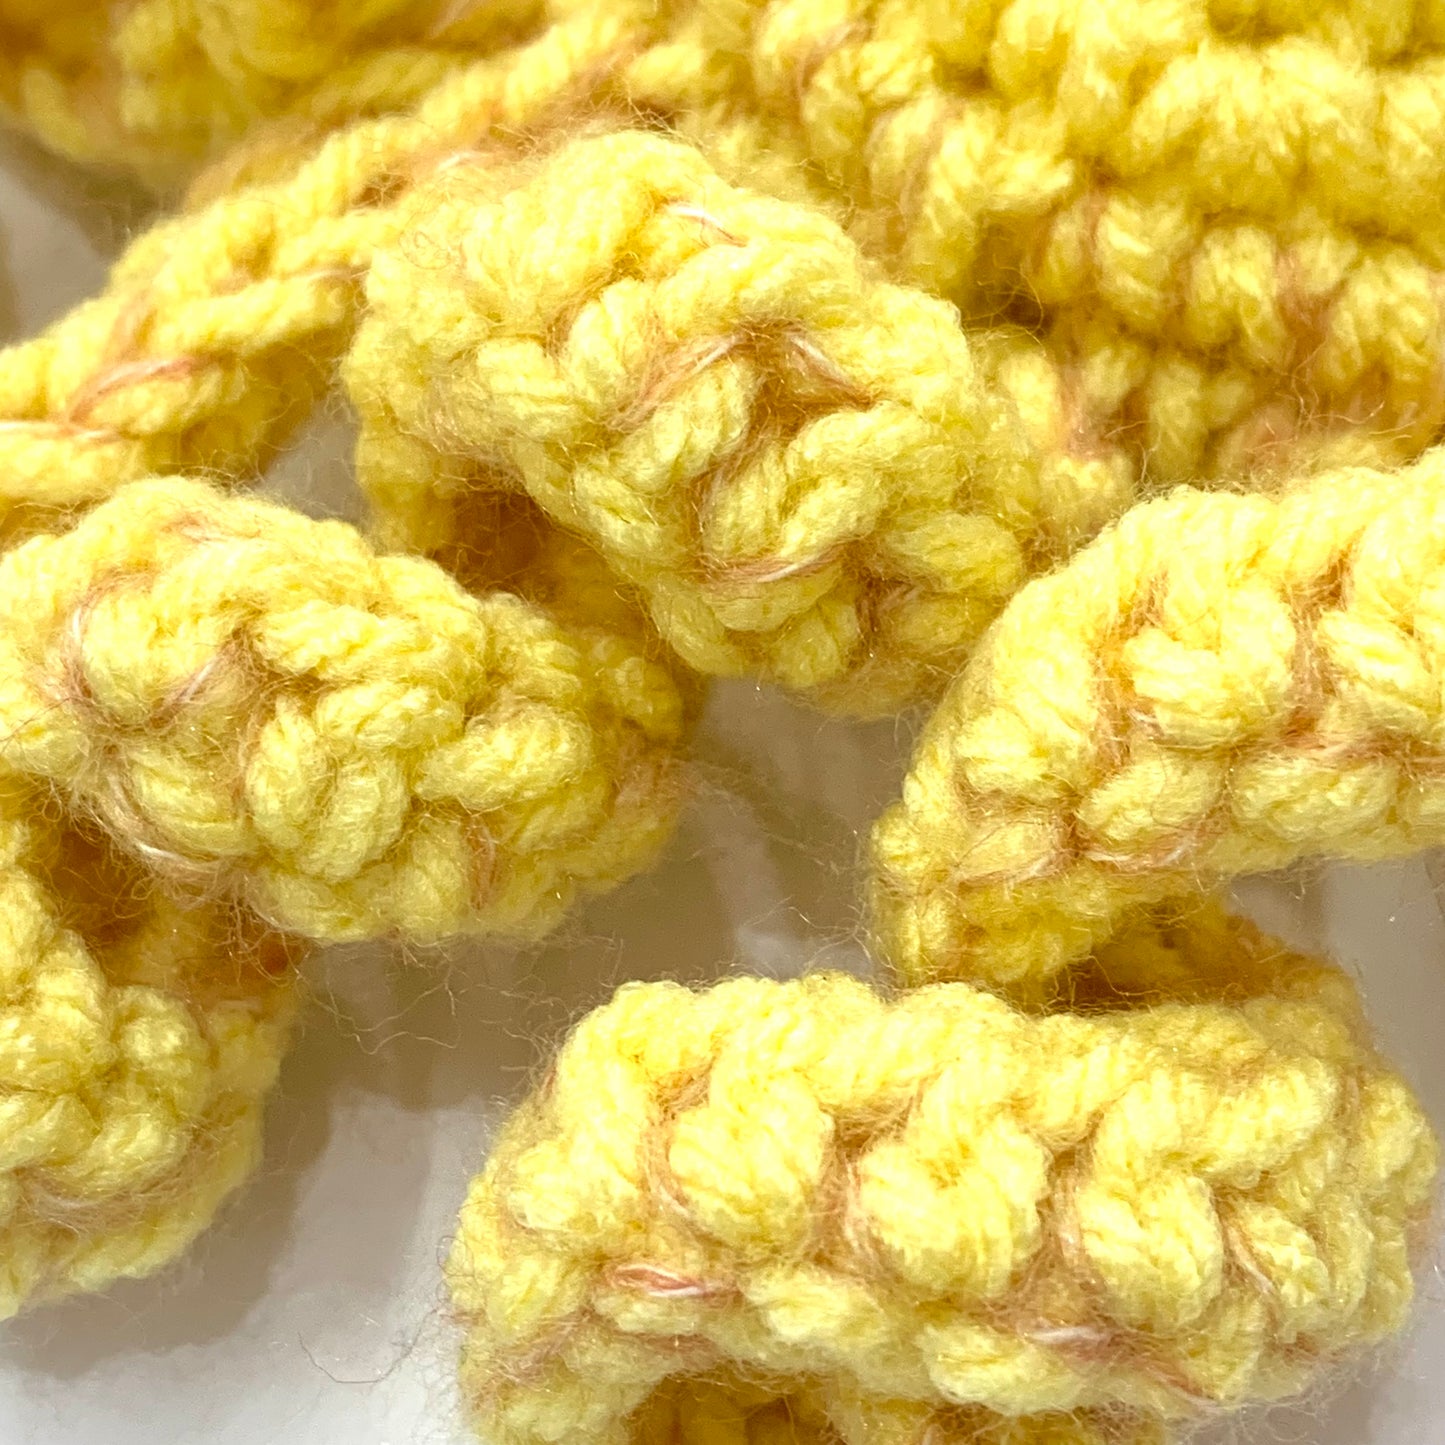 BEAKNITS- CROCHETED OCTOPUS - Yellow with Peach